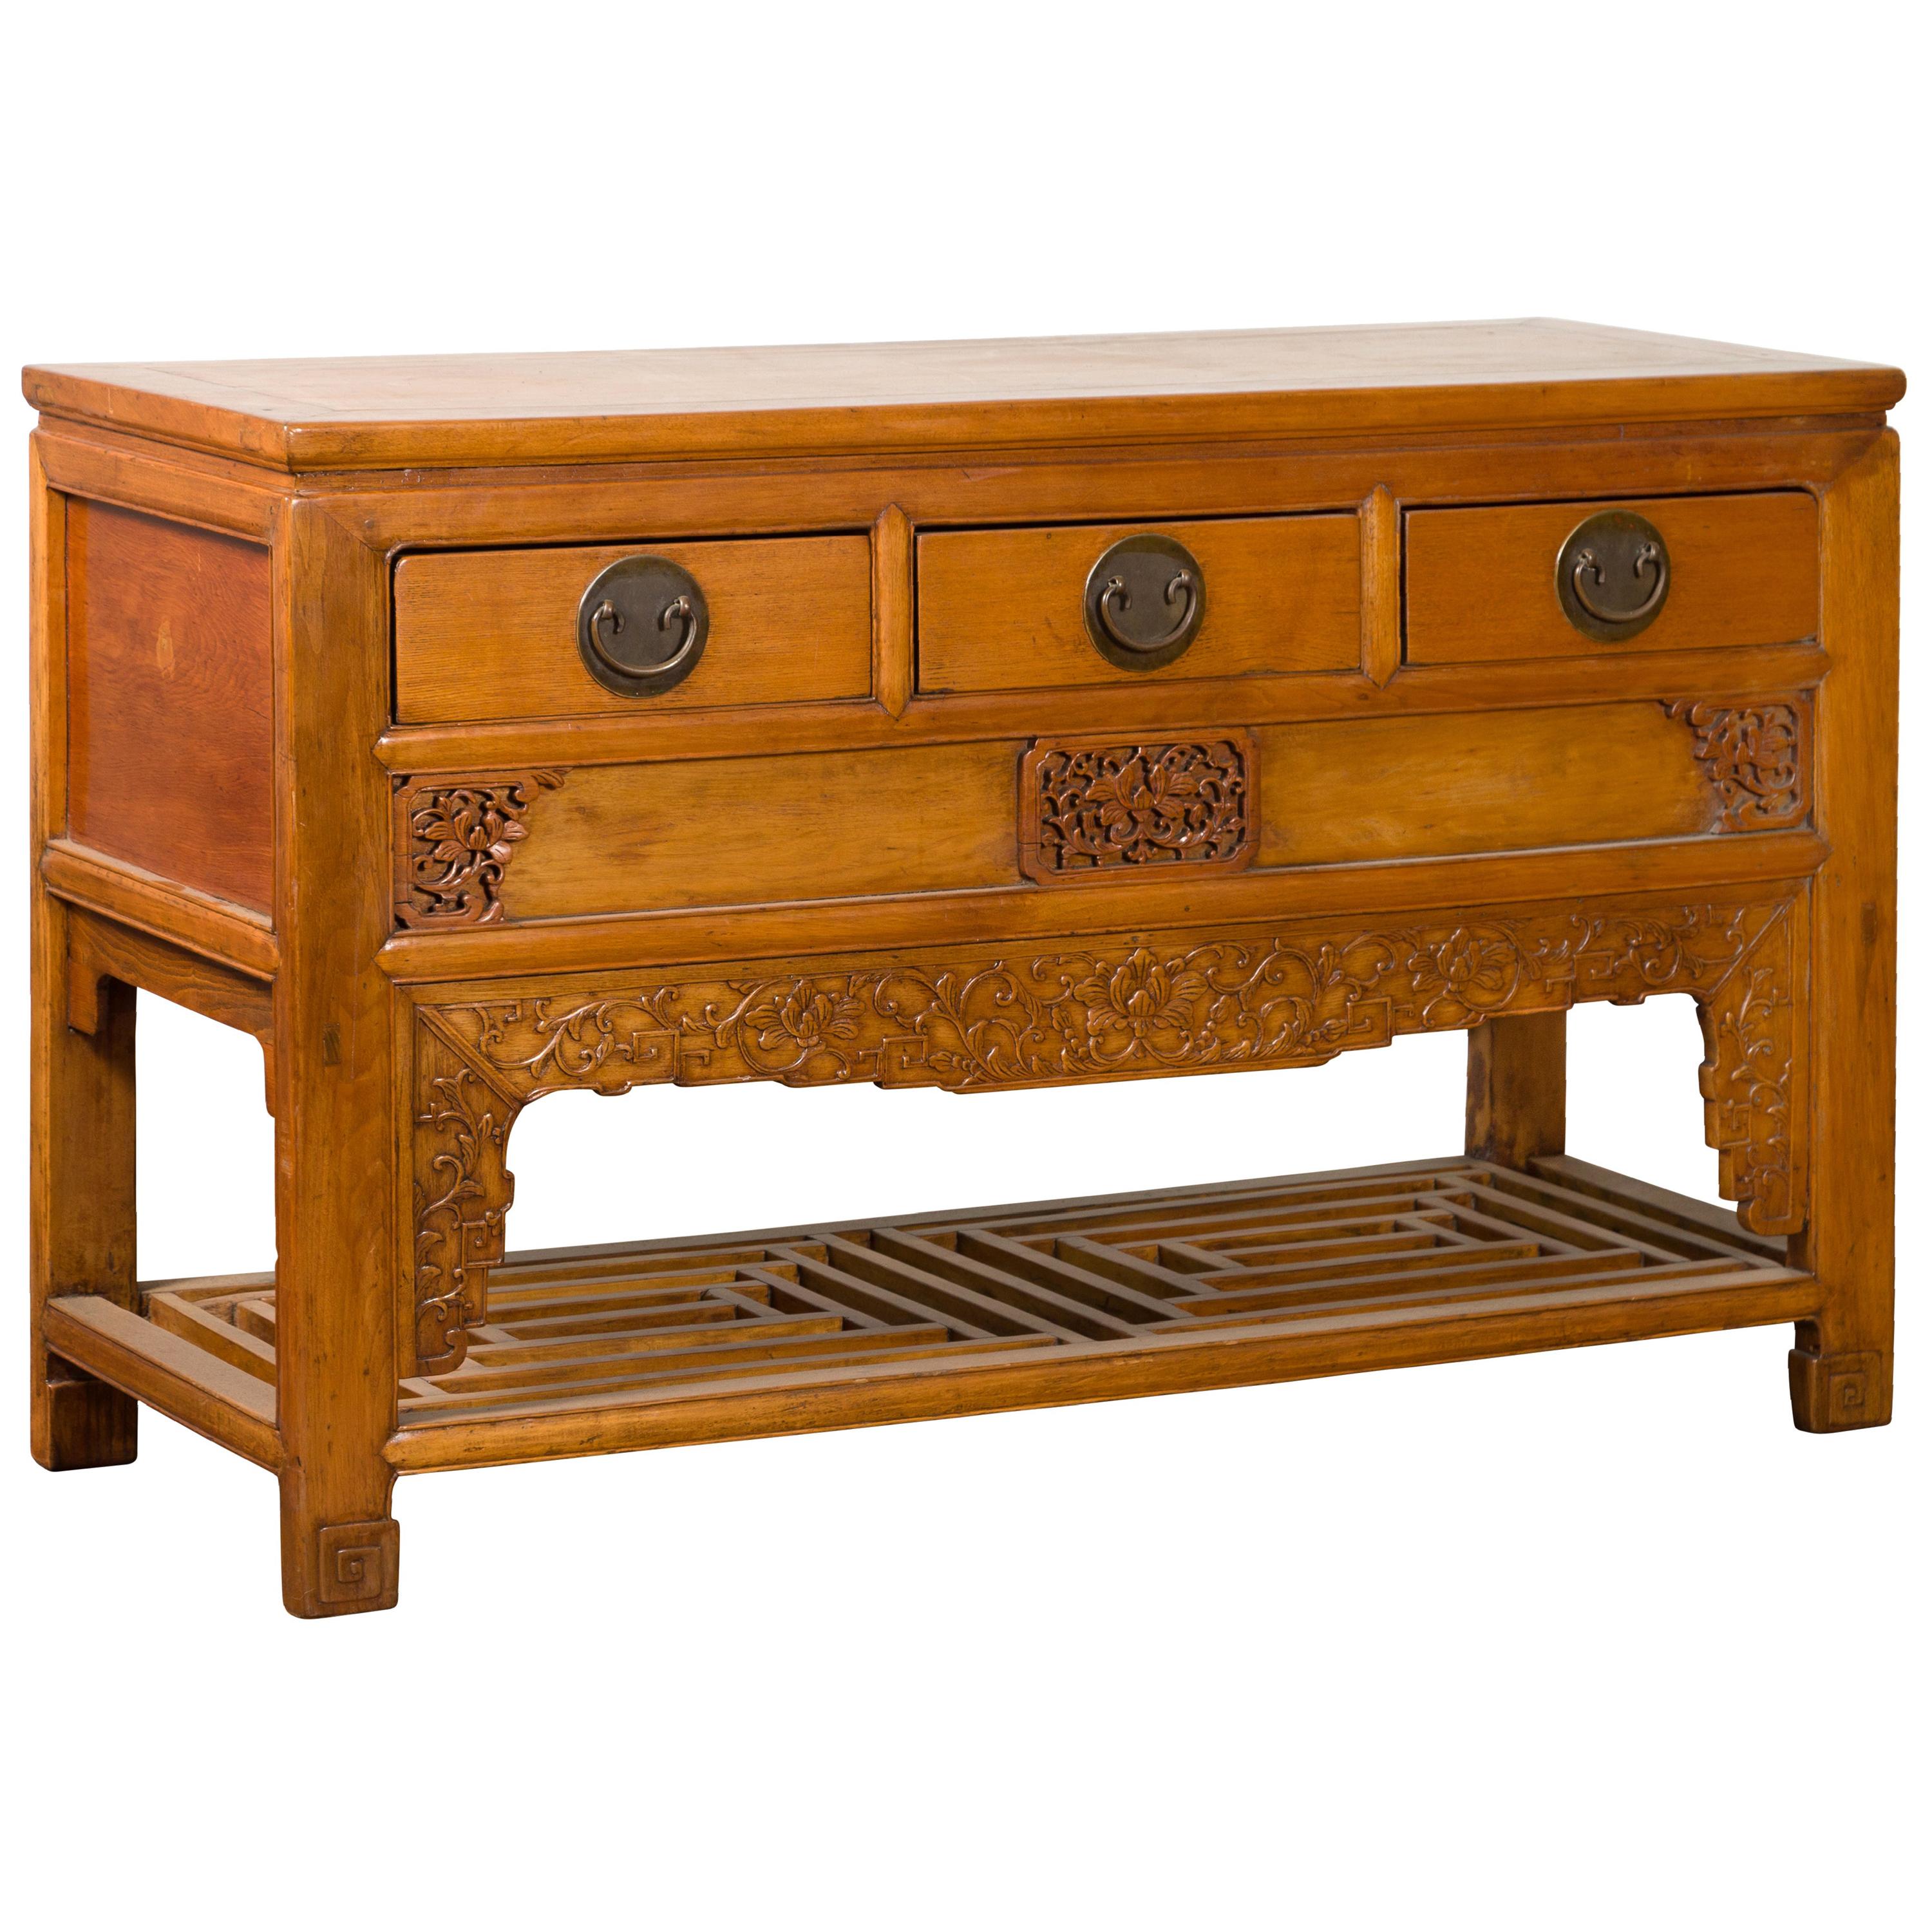 Chinese Qing Dynasty 19th Century Waisted Sideboard with Carved Floral Motifs For Sale